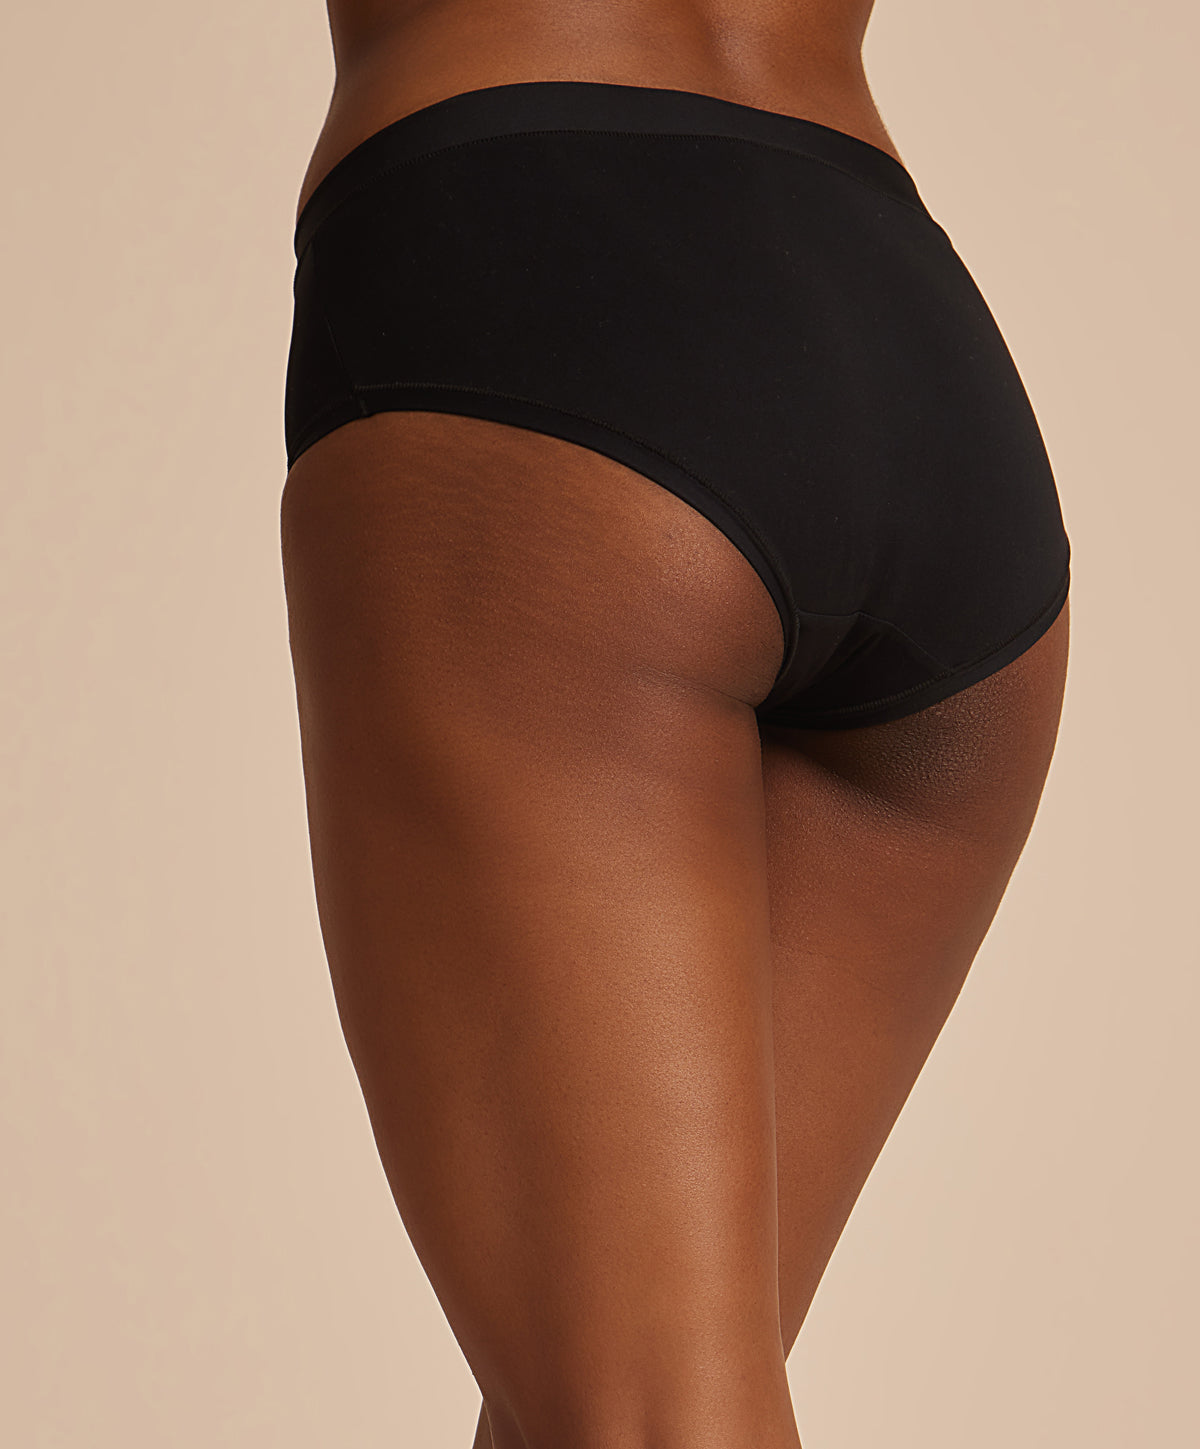 Pierre Cardin Lingerie Malaysia - Say goodbye to VPL (Visible Panty Line)  with our seamfree panty, flat against the skin and discreet under clothing.  One less thing to worry about. No worries